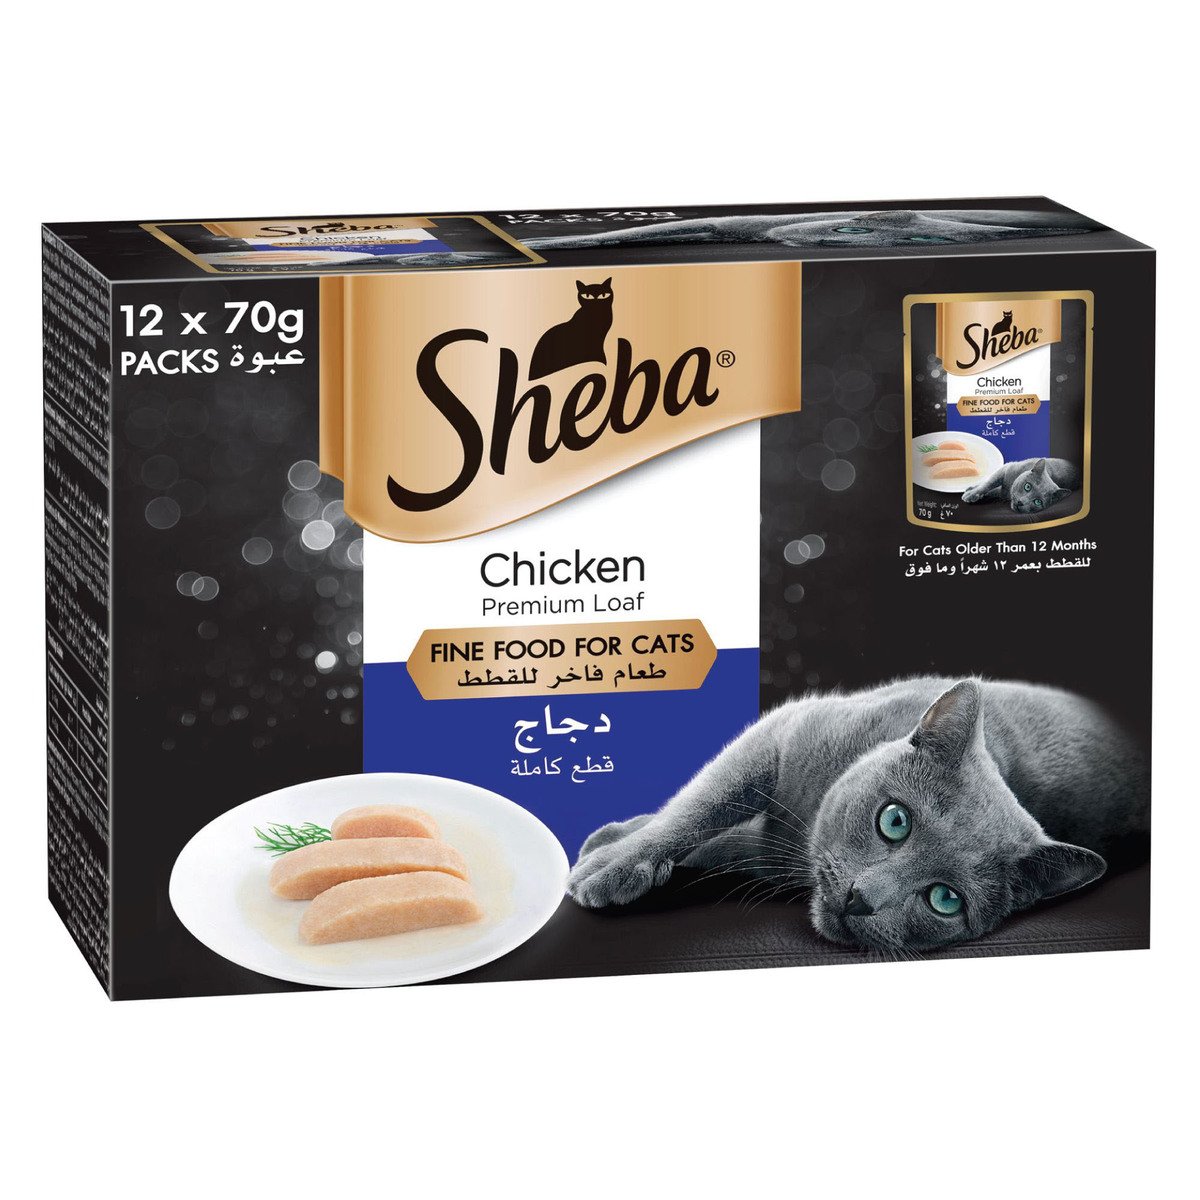 Sheba Chicken Premium Loaf Fine Food for Cats 12 x 70 g